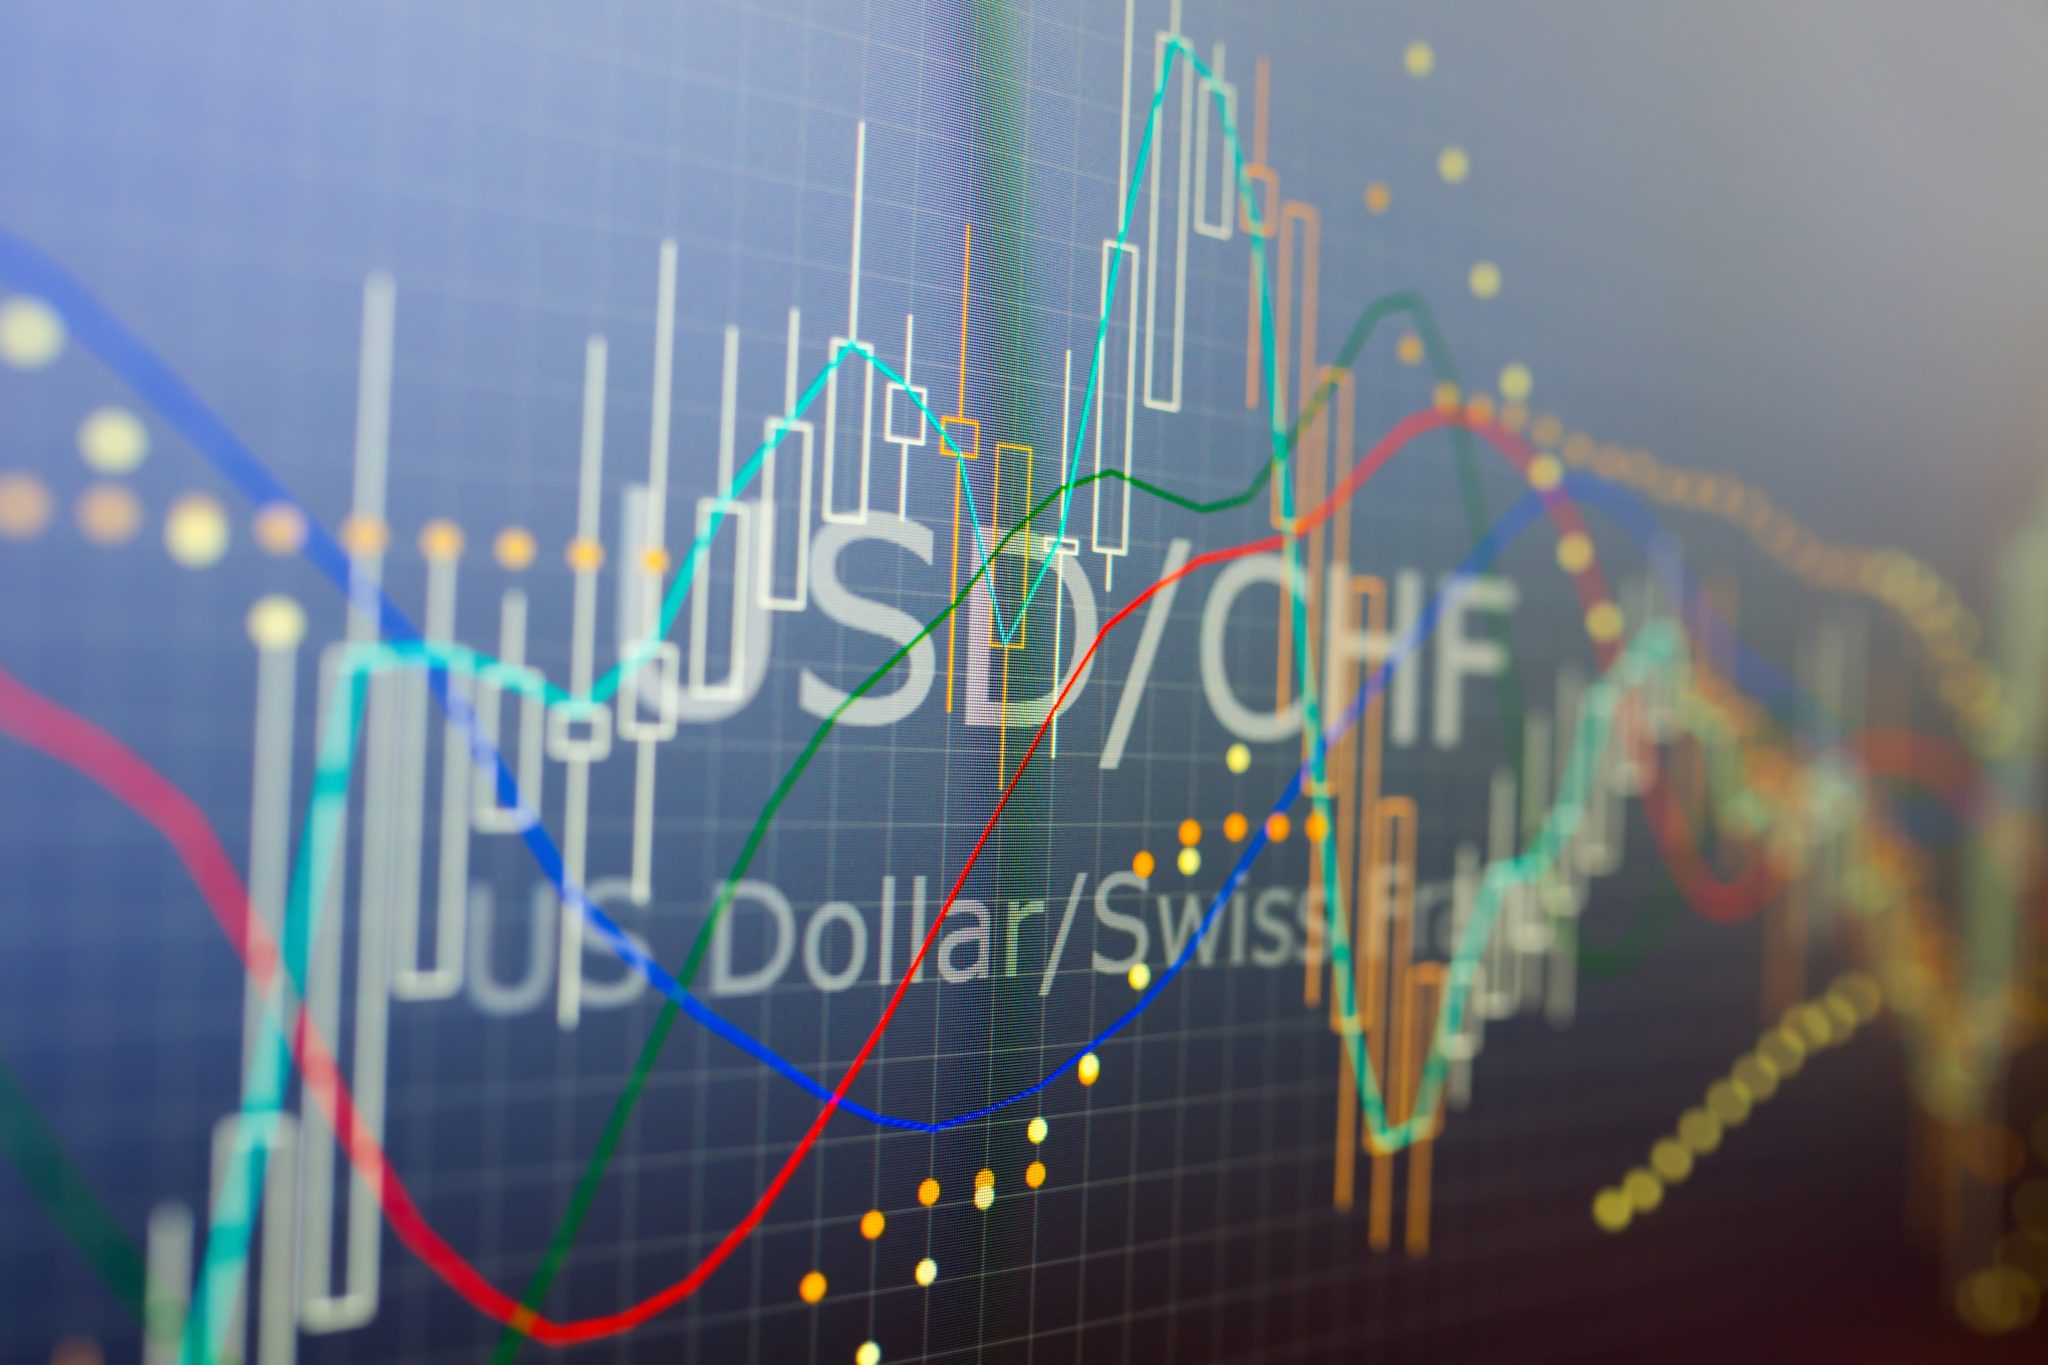 USD/CHF Flunks Out Due to Falling Bond Yields